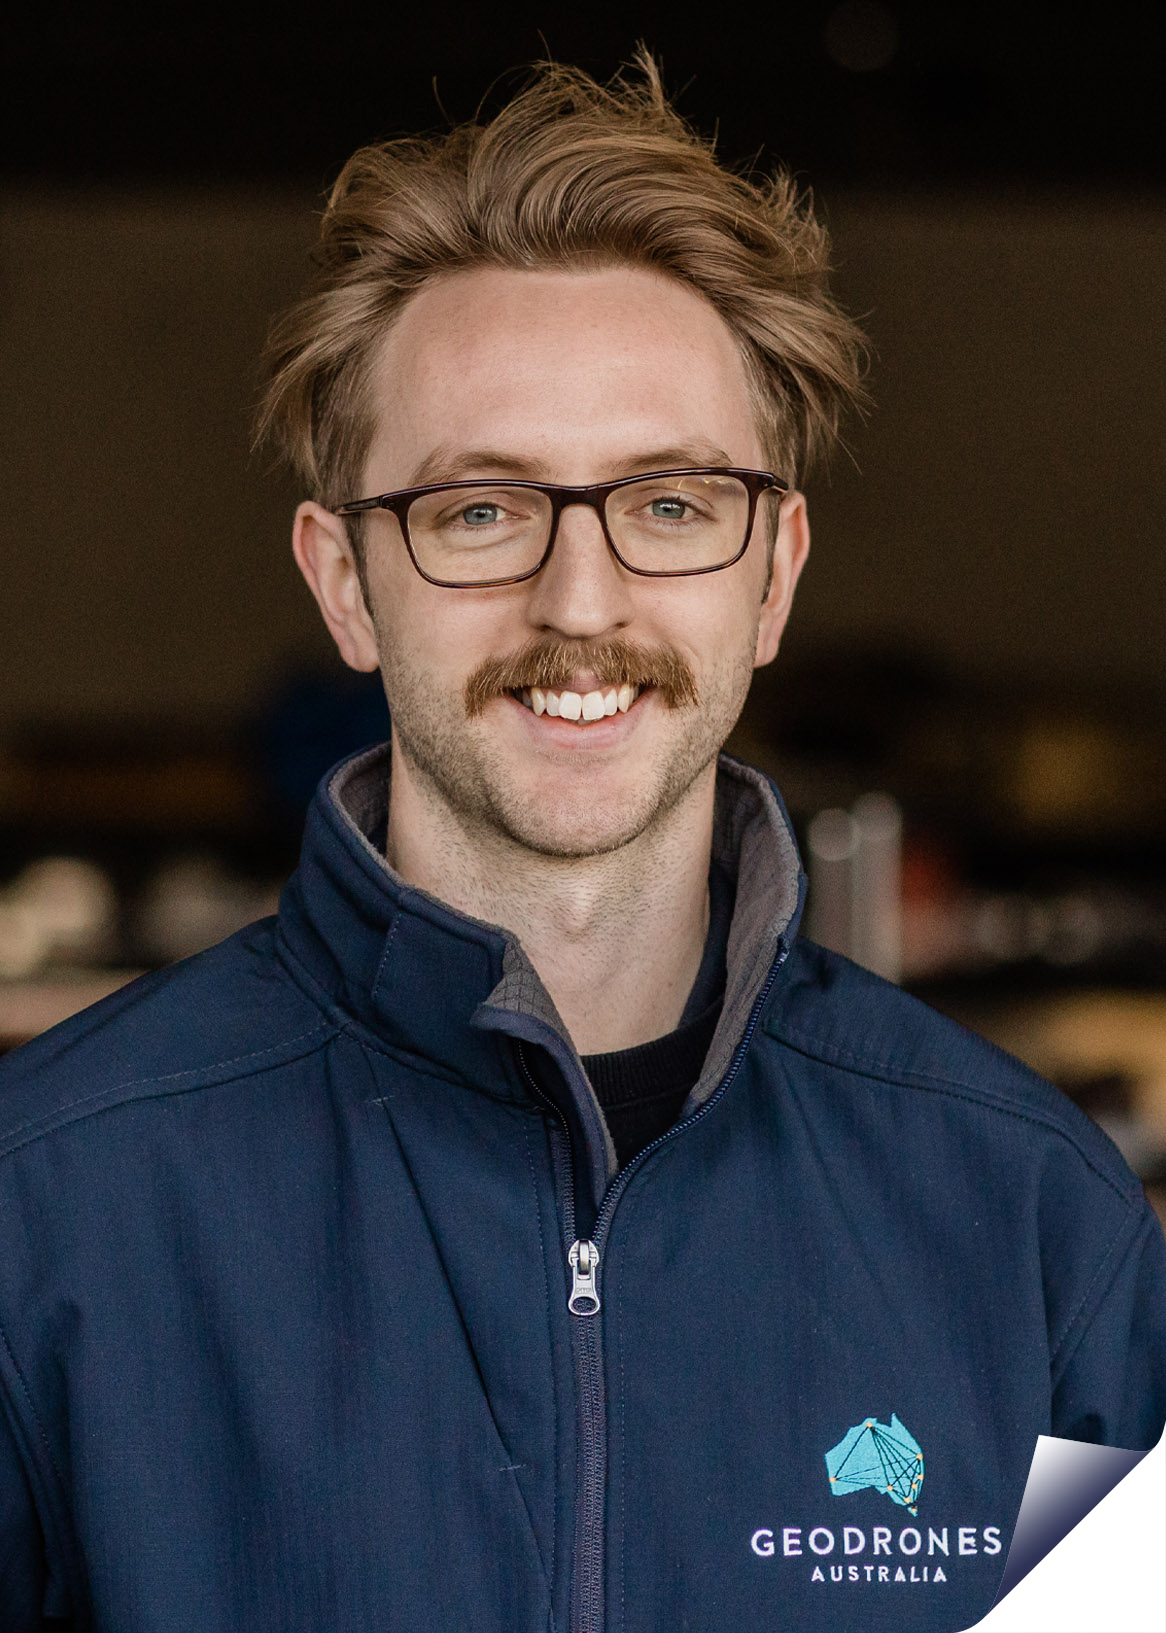 <p style="text-align: center;"><strong>Ben Claase</strong></p>
<p>INDUSTRIAL ENGINEER</p>
<p style="text-align: center;">Ben is a graduate of Industrial Design from University of Canberra. Ben is a composite materials specialist with experience in the competitive automotive industry, and has been working in a rapid prototyping environment for the last 4 years.</p>